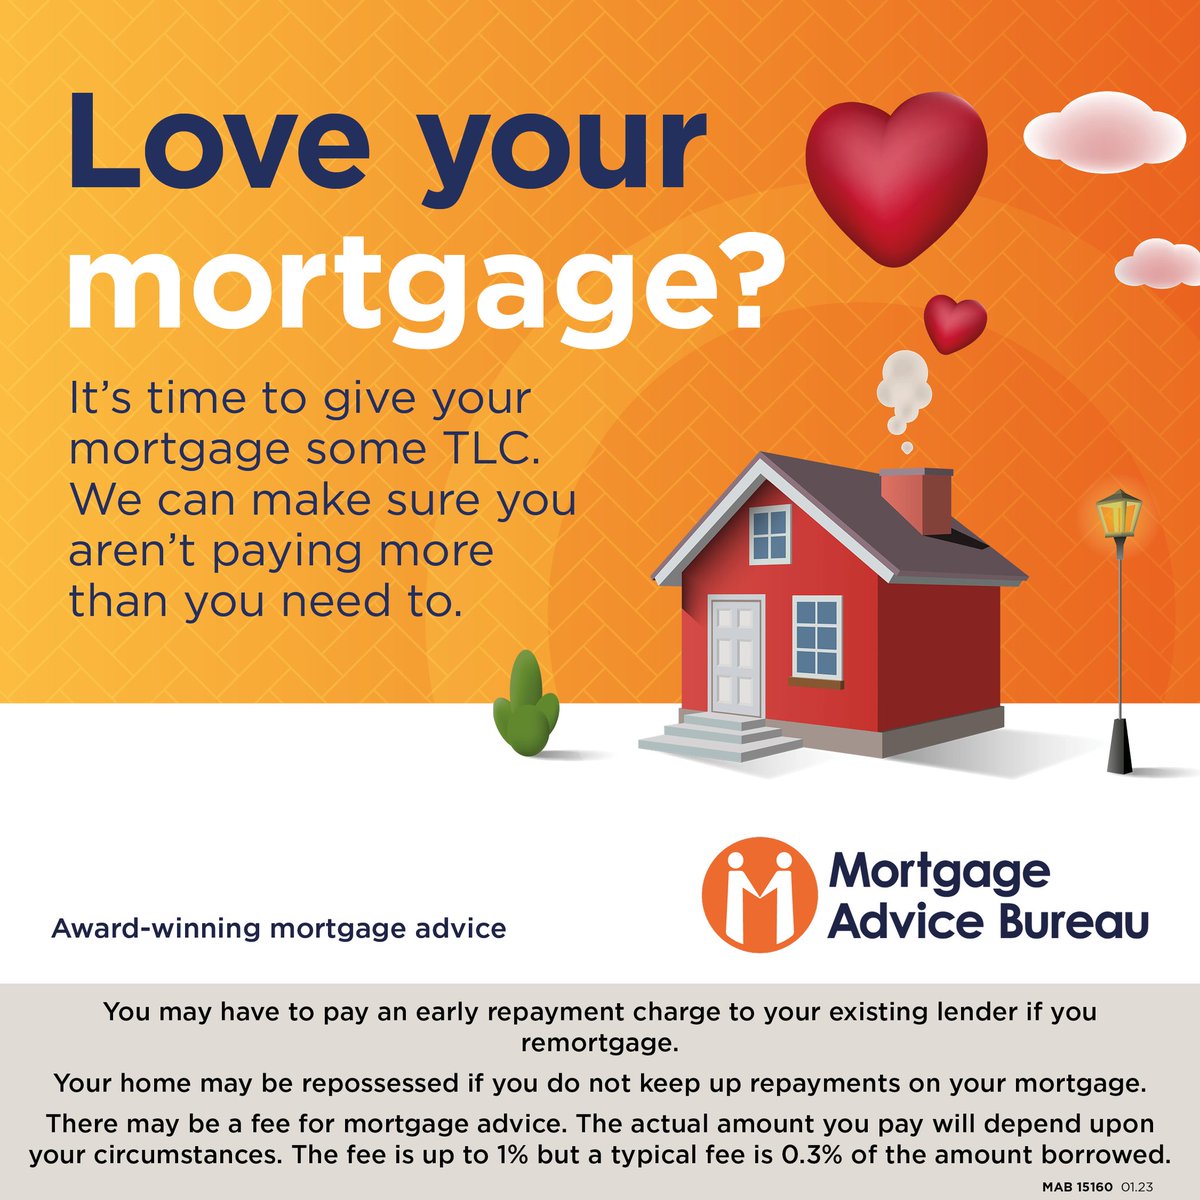 With Valentines Day just around the corner, we think it's time to give your mortgage some TLC 💞 We can make sure you aren't paying more than you need to. Get in touch to learn more - you can call 📞 e-mail 💻 or send a DM. #Mortgage #Property #Remortgage